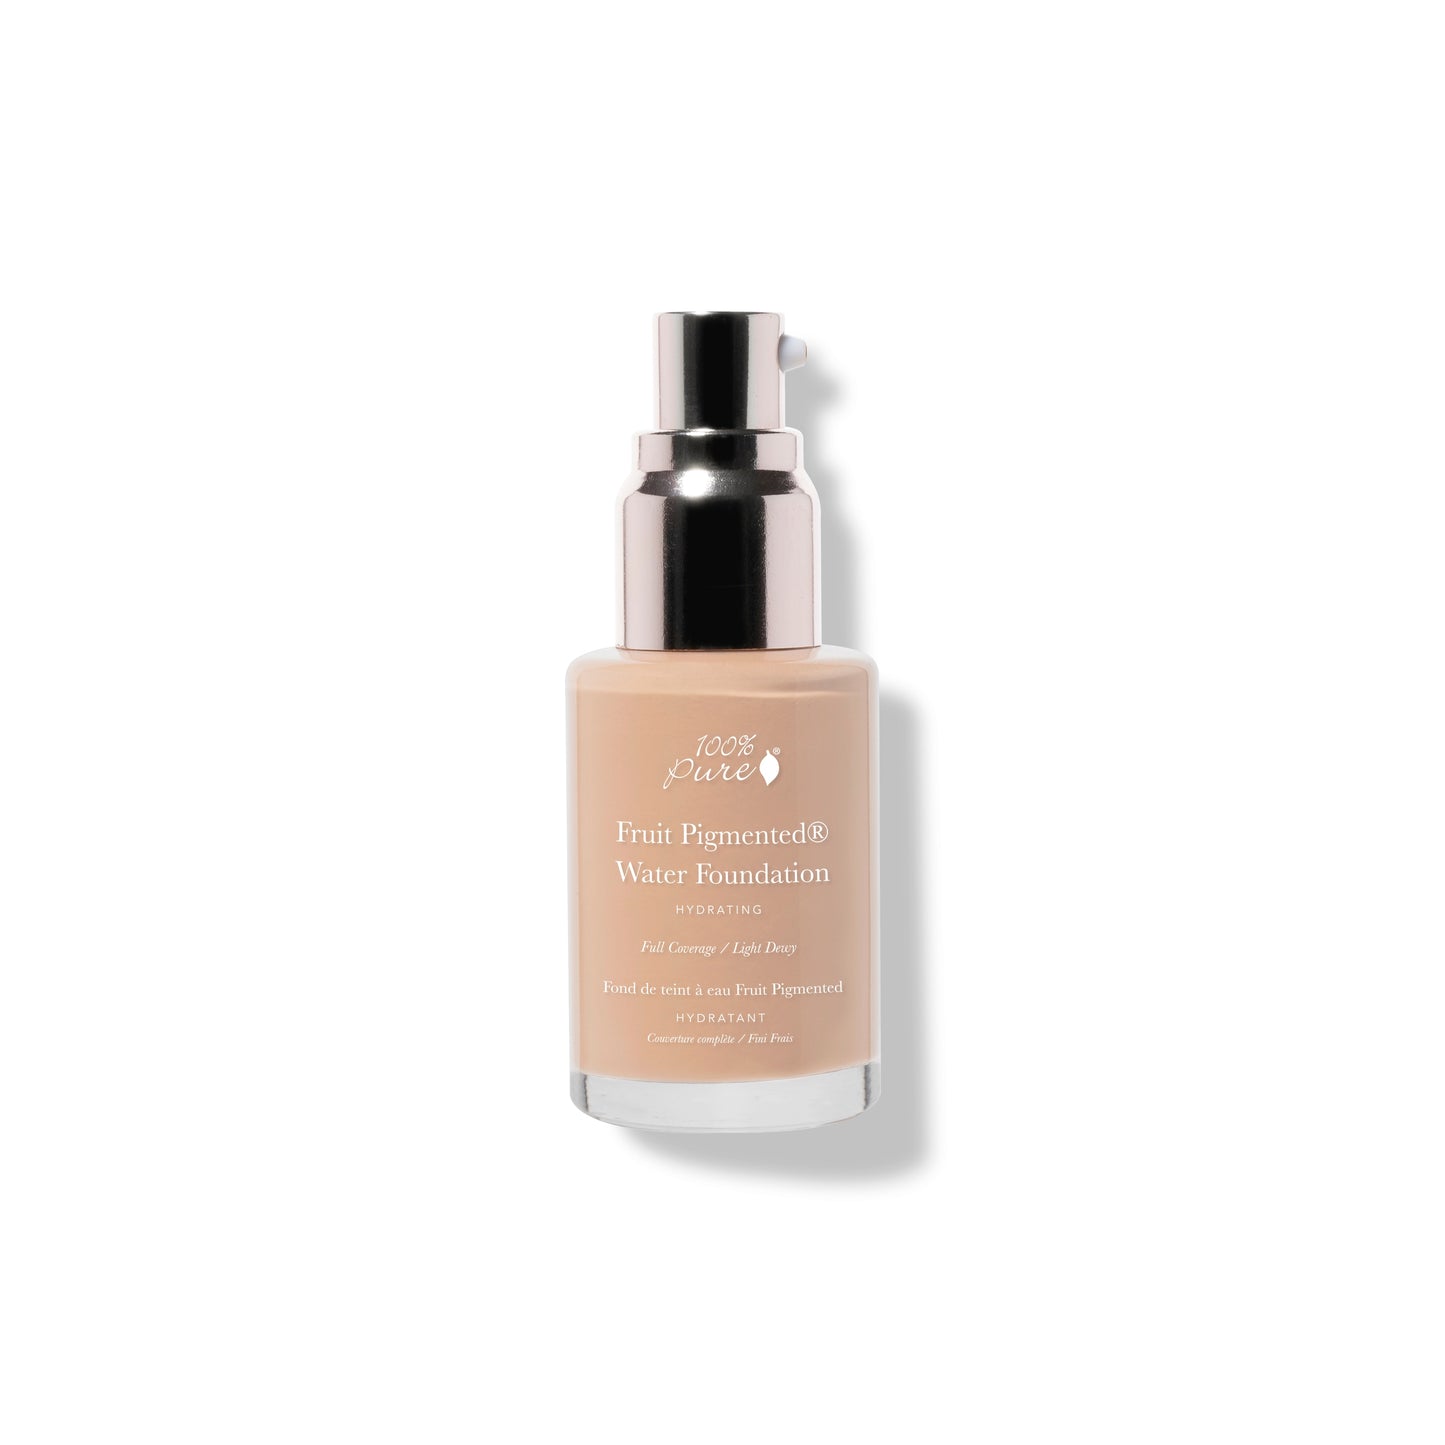 100% PURE Fruit Pigmented Full Coverage Water Foundation warm 4.0